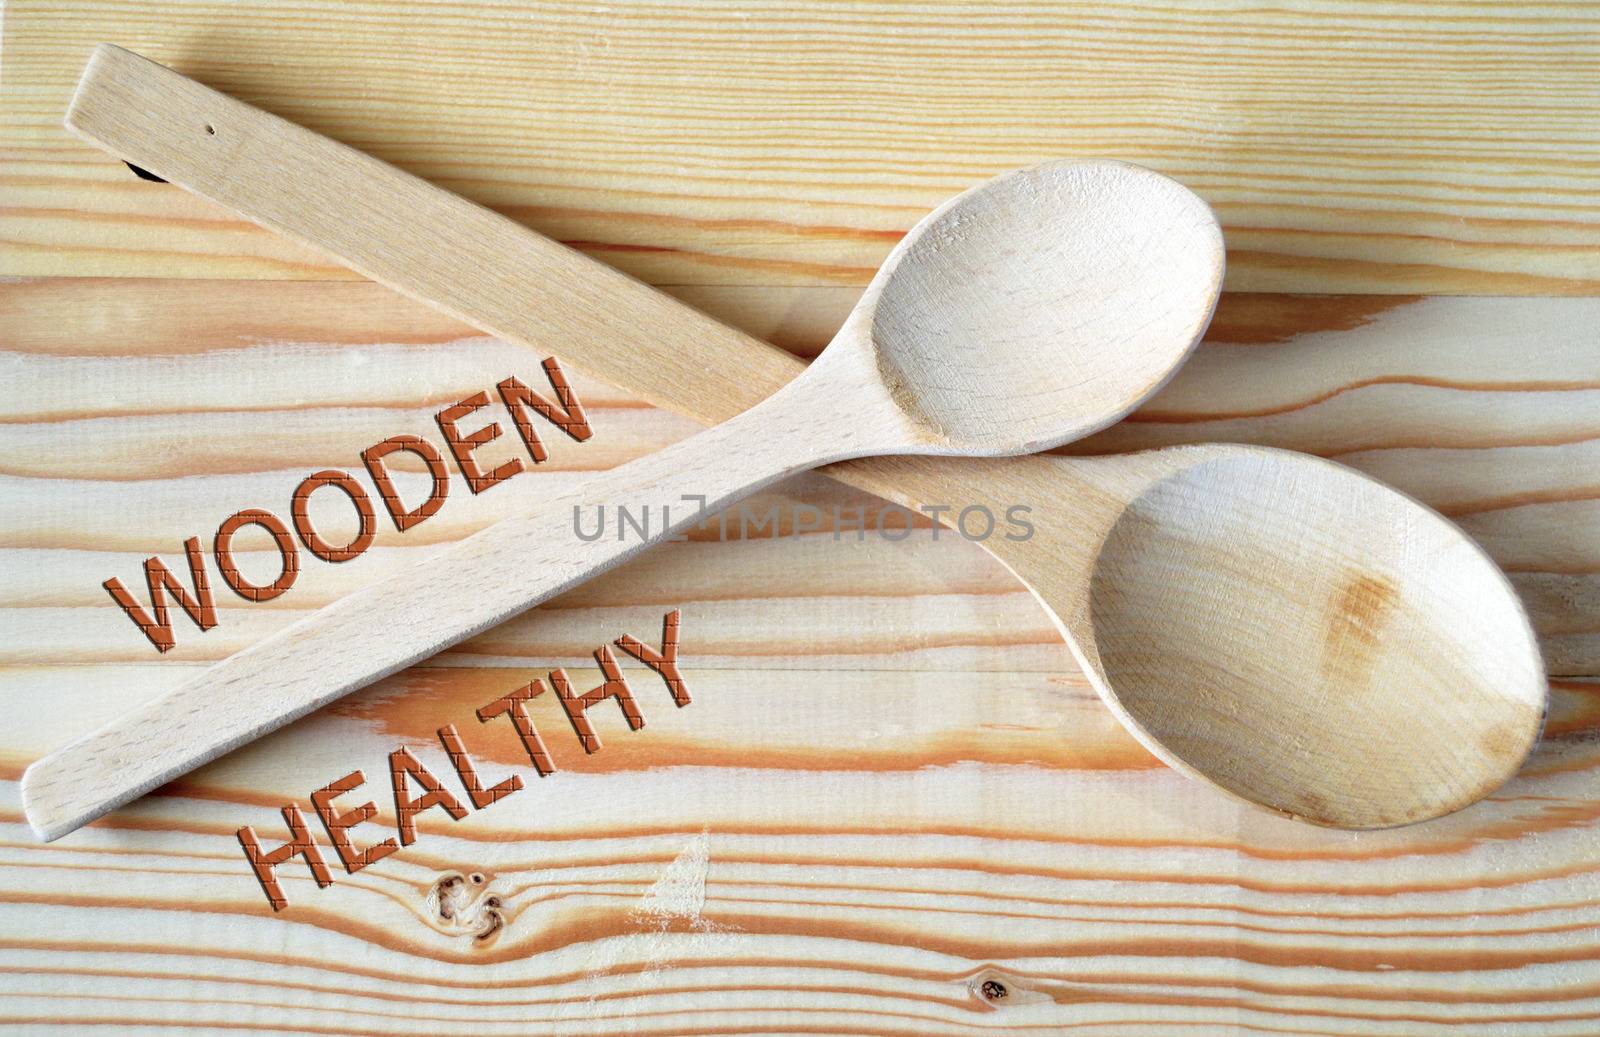 wooden spoon and timber products for health by nhatipoglu